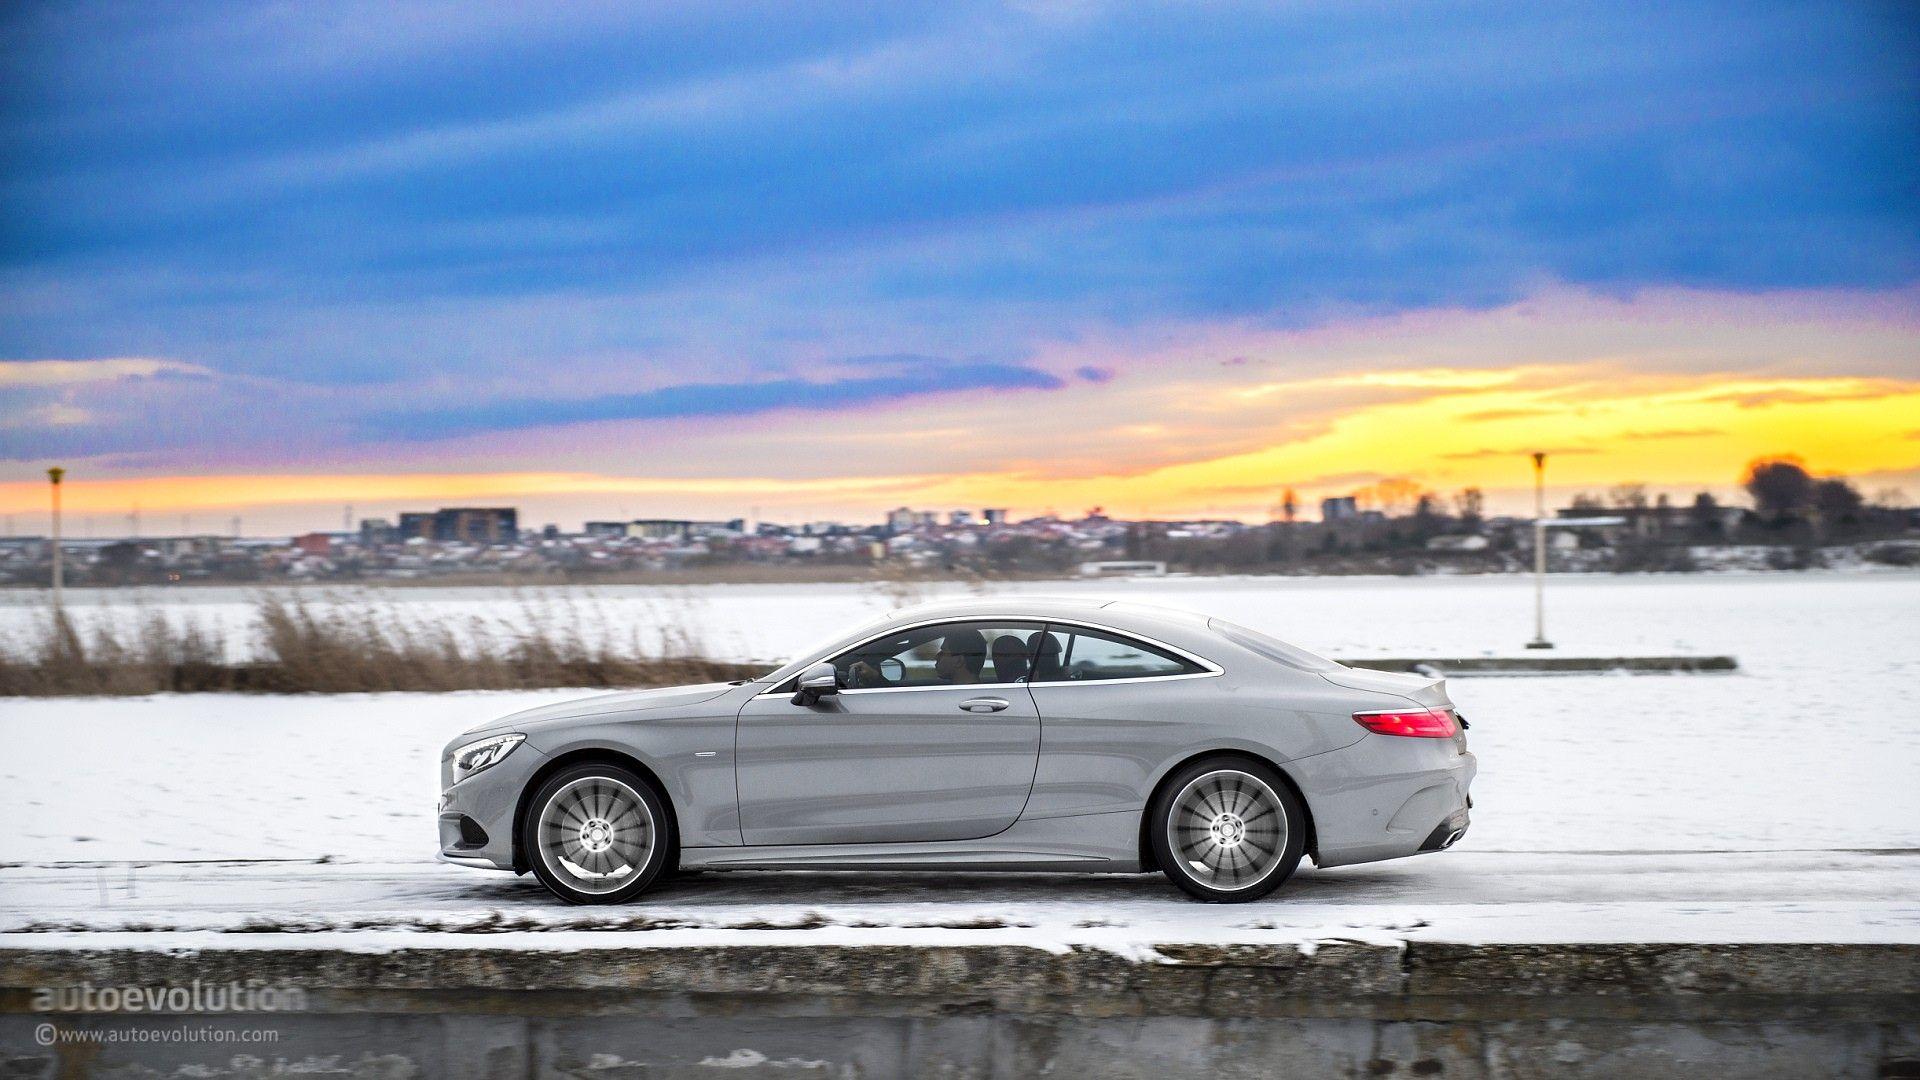 Mercedes Benz S Class Coupe HD Wallpaper: If Rodin Was